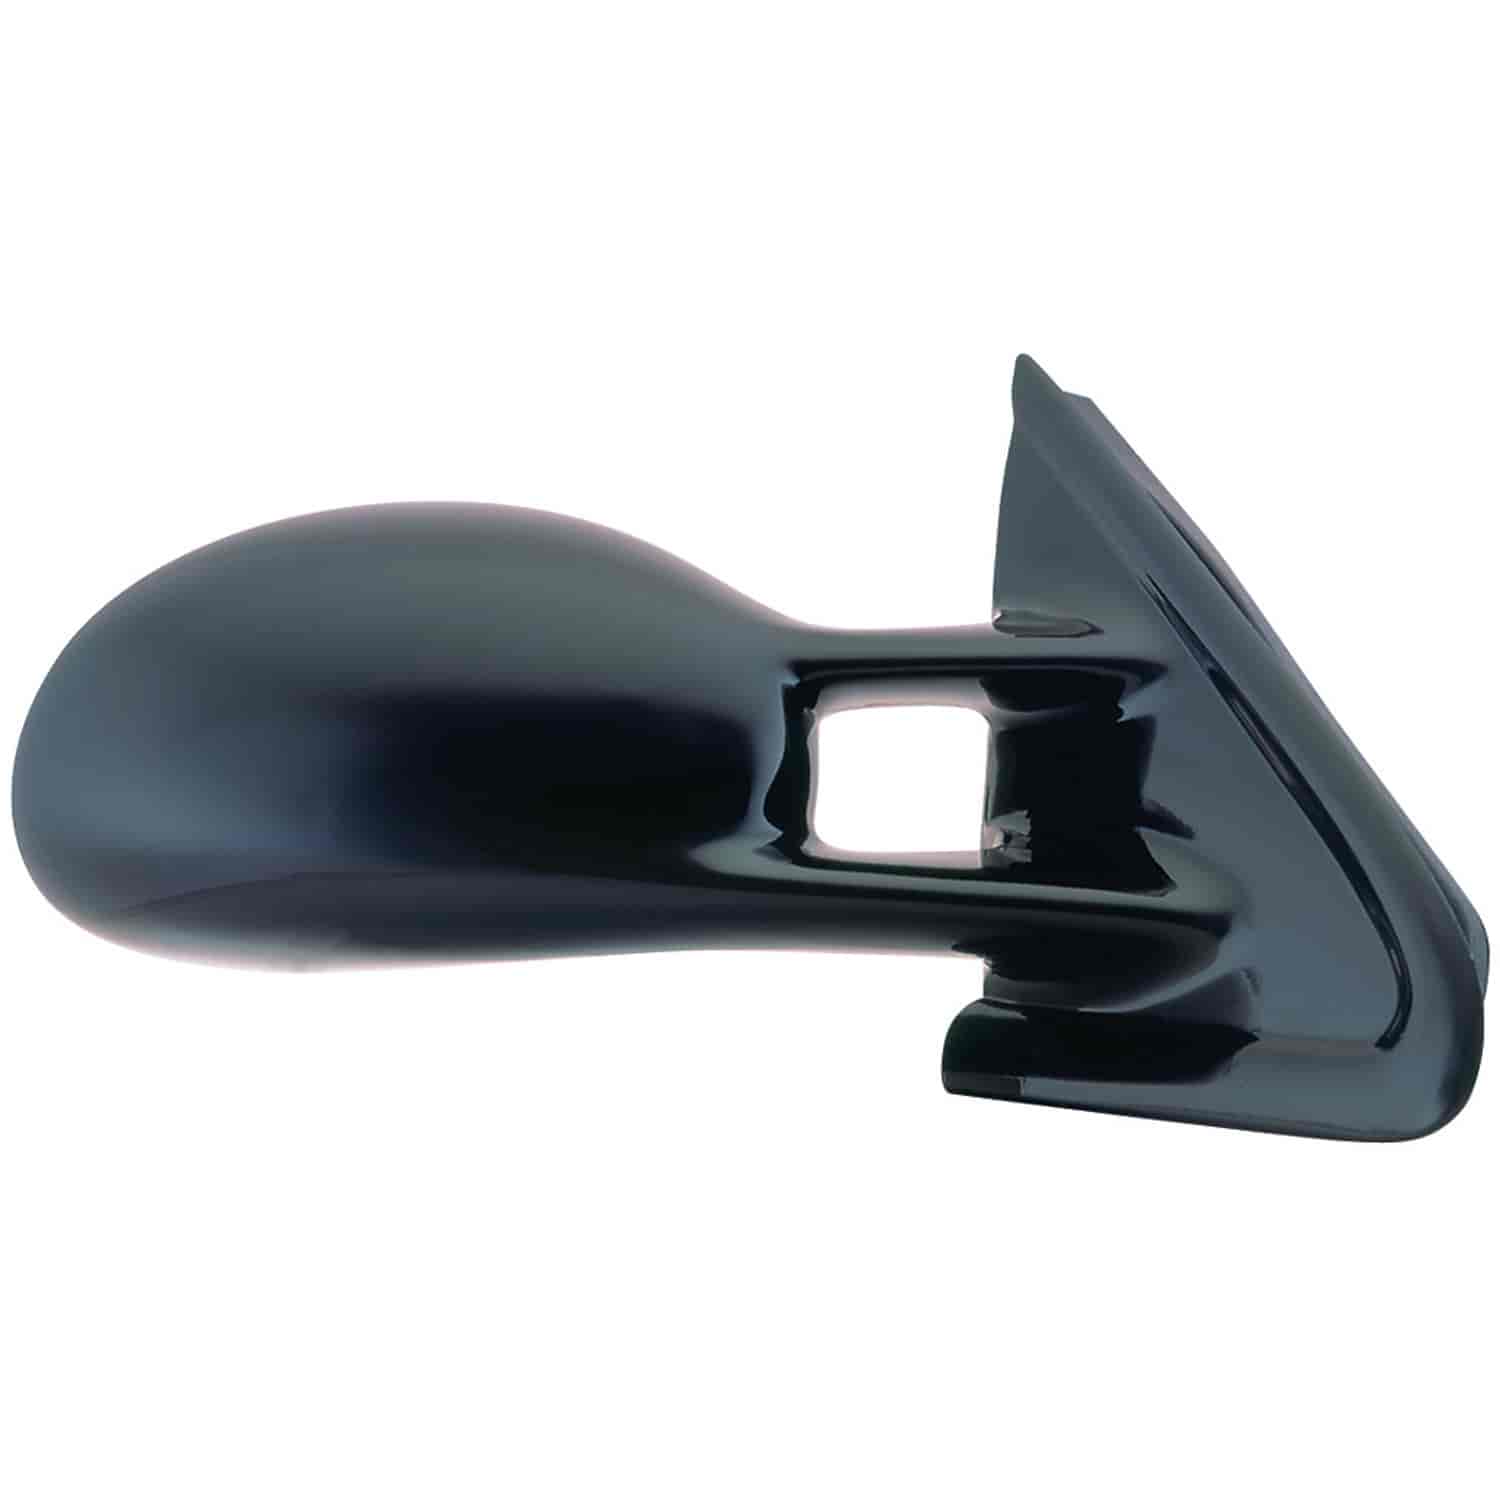 OEM Style Replacement mirror for 95-00 Chrysler Cirrus Dodge Stratus Plymouth Breeze passenger side